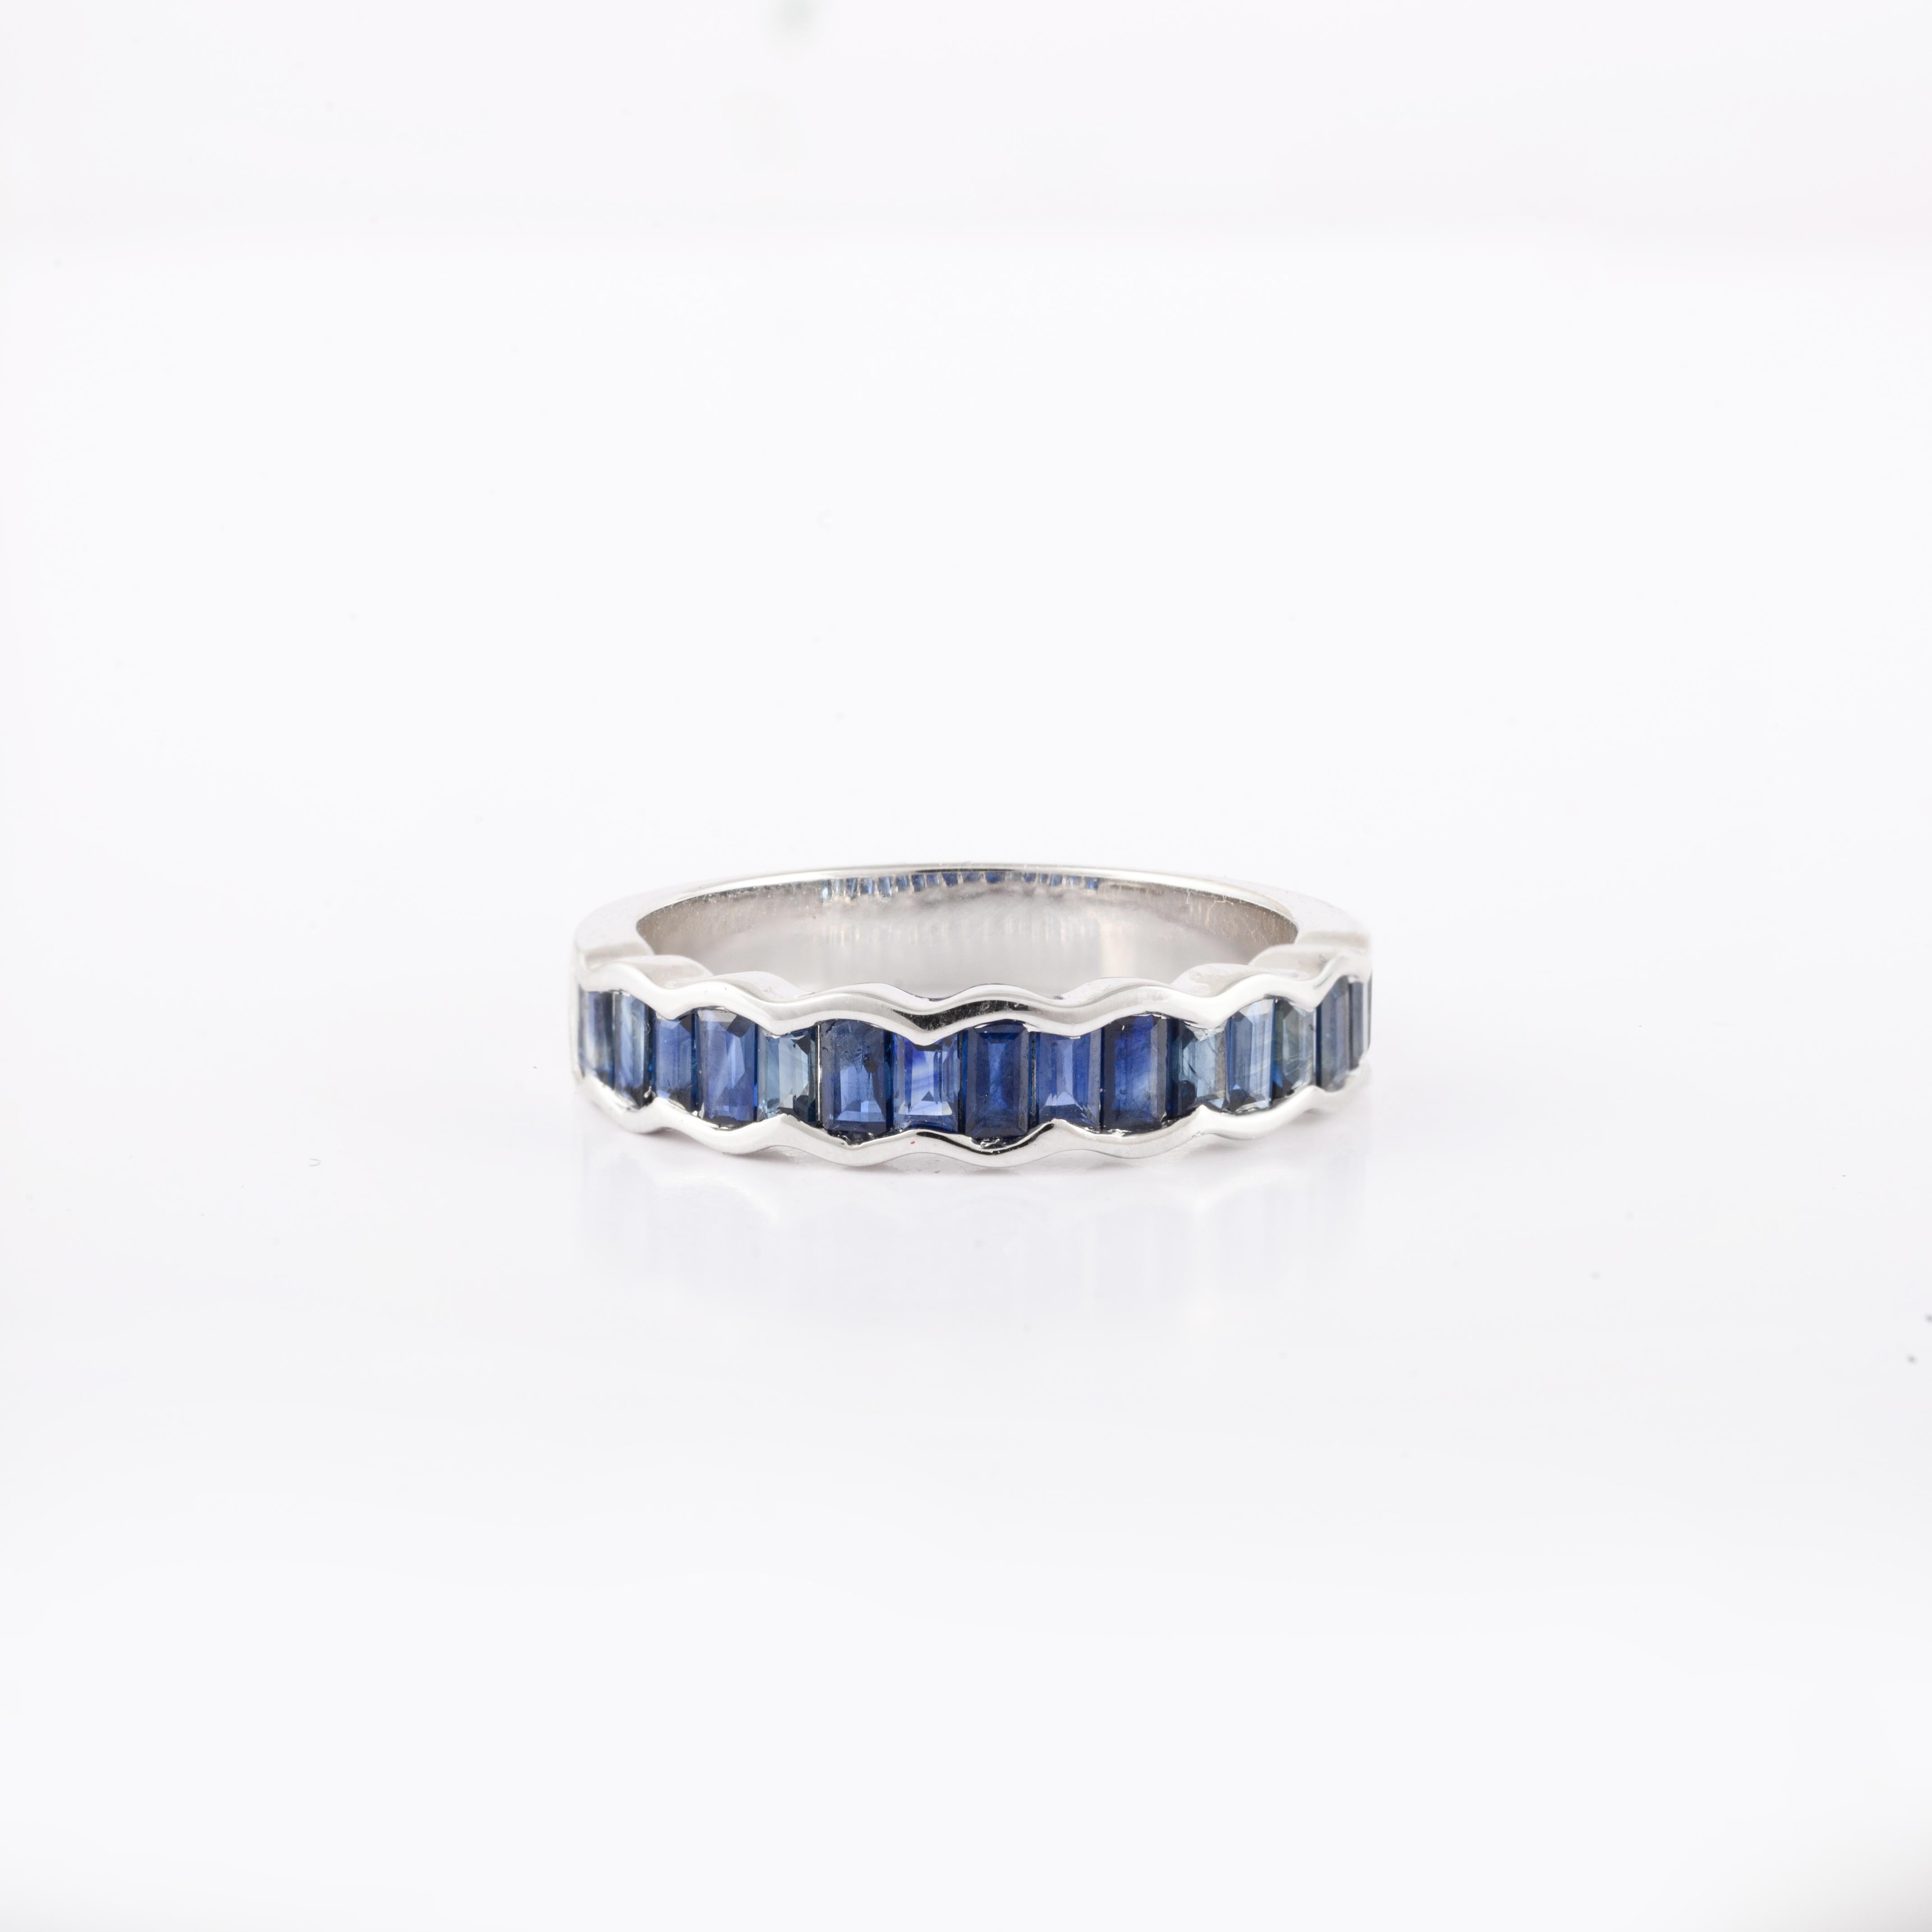 For Sale:  Elegant Stackable Blue Sapphire Gemstone Band Ring in 18k Solid White Gold 2